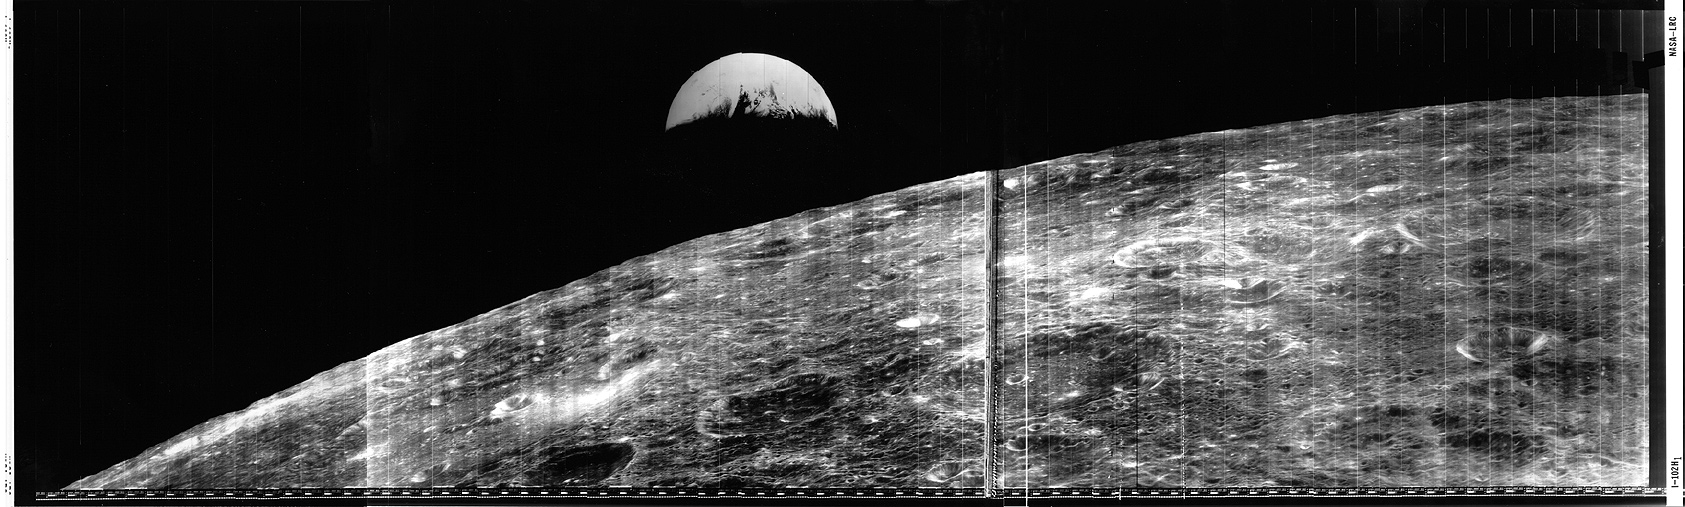 View of Earth over the Moon's horizon. Image looks high-contrast and vintage. 